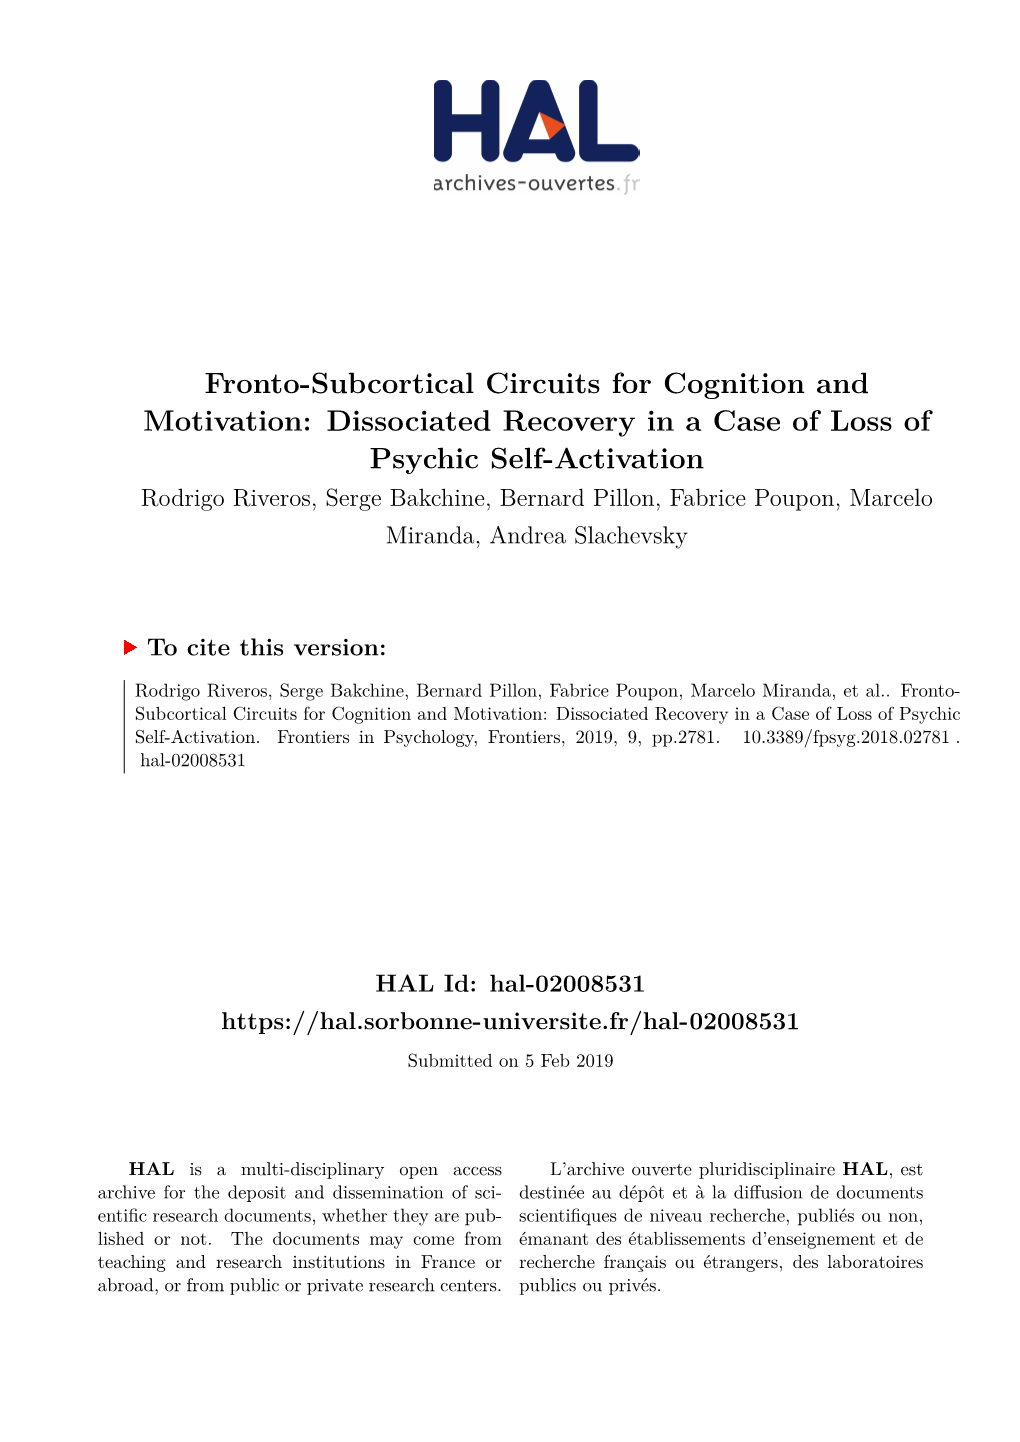 Fronto-Subcortical Circuits for Cognition and Motivation